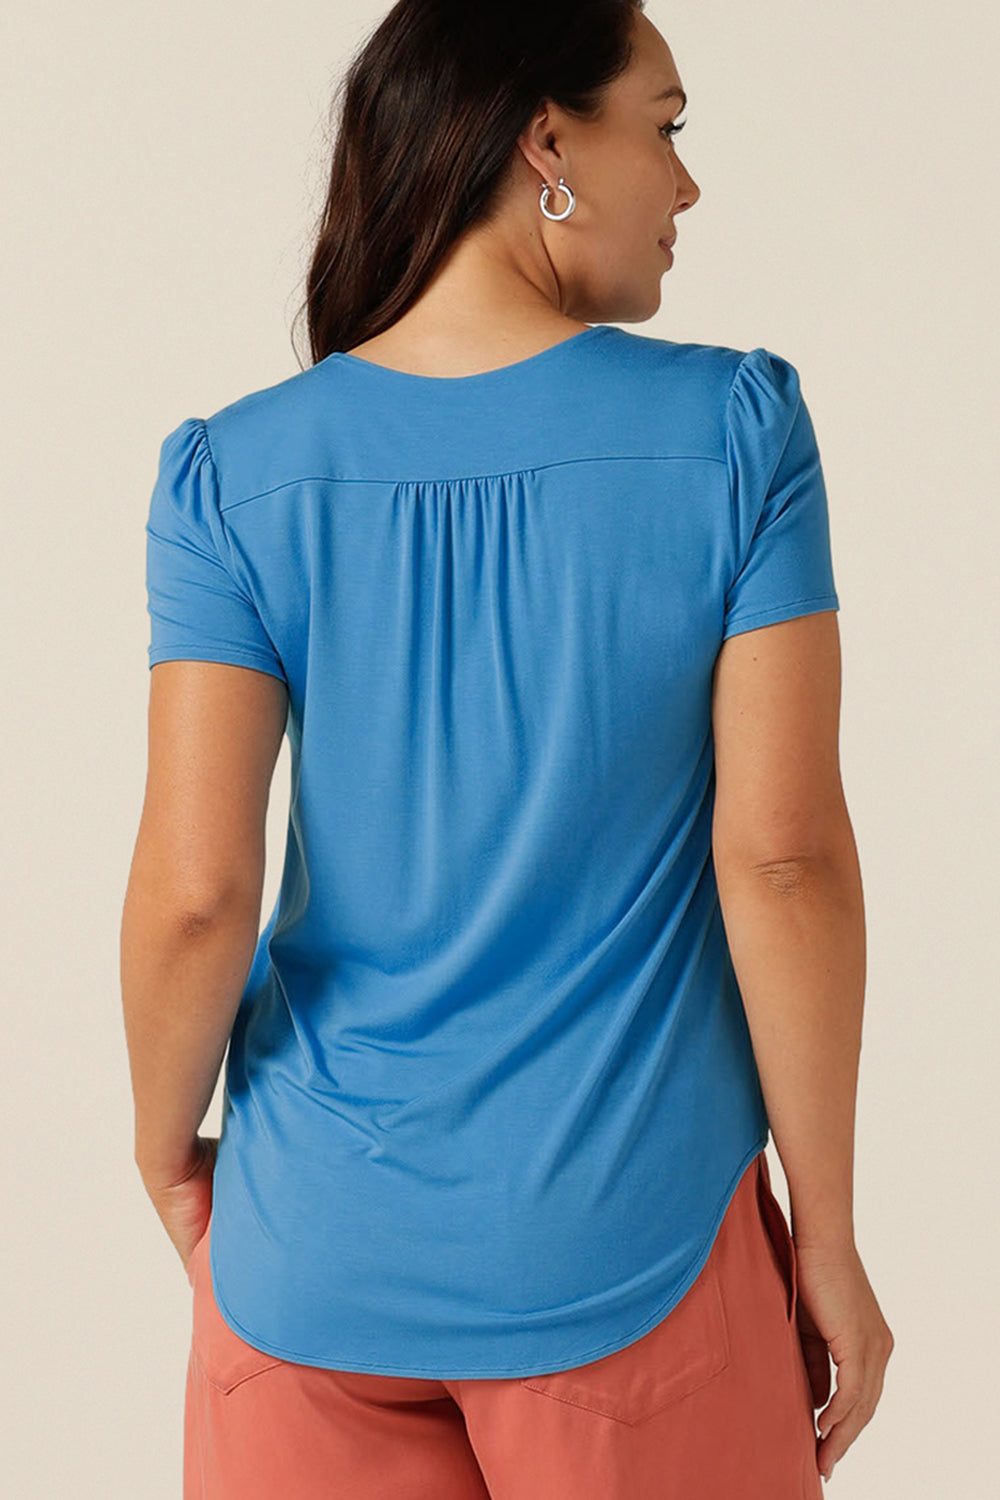 blue v-neck short sleeve top in bamboo jersey